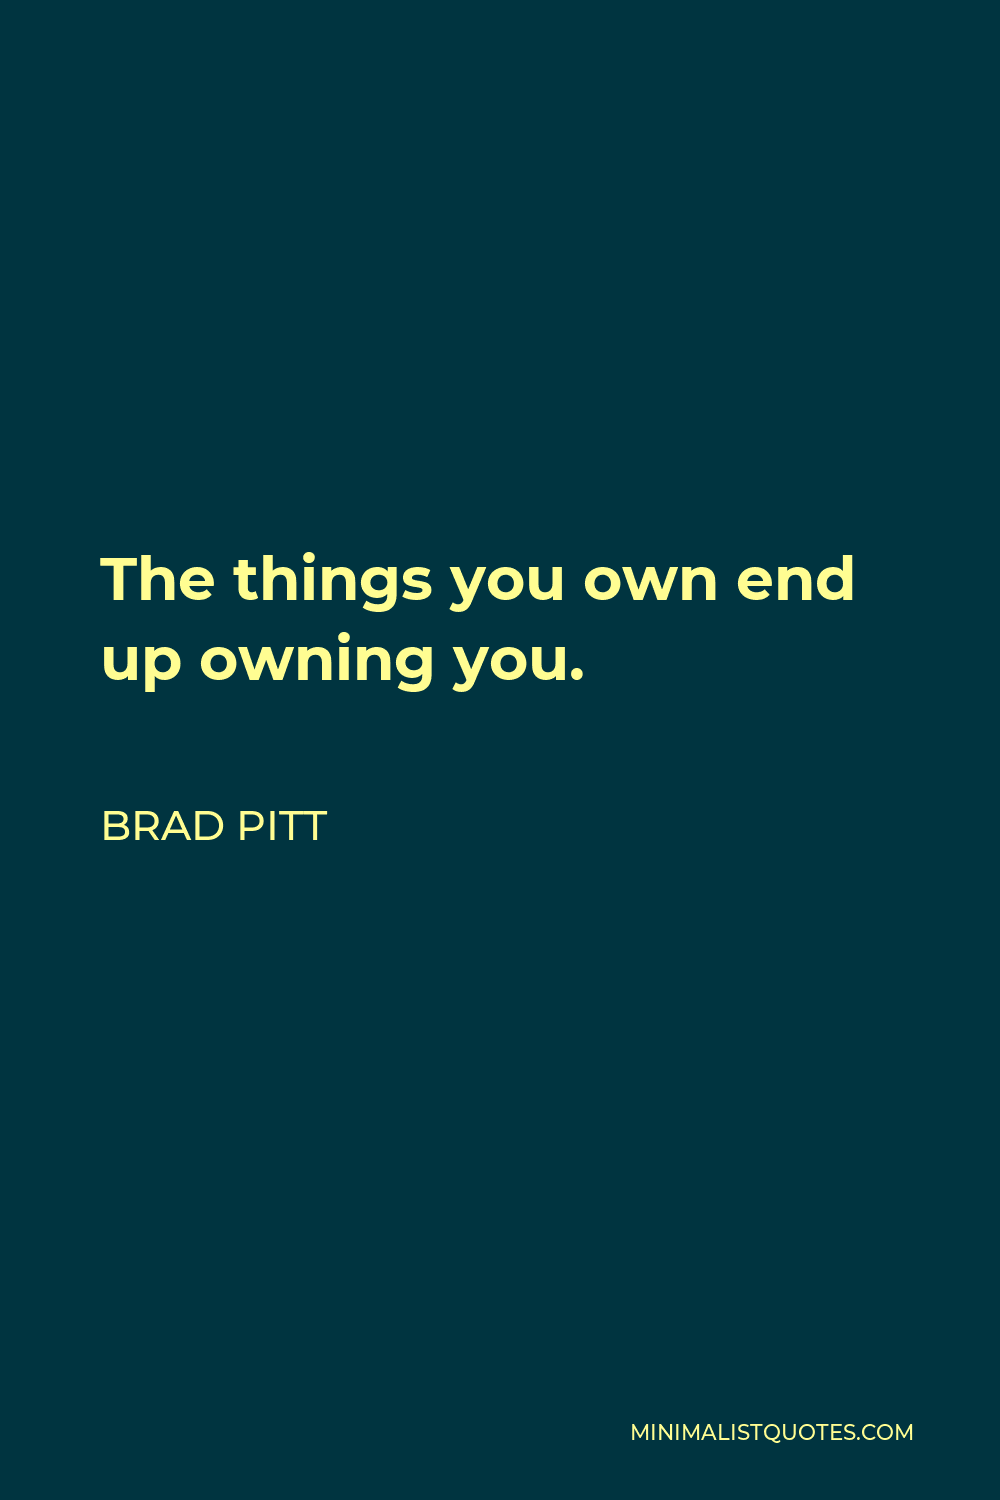 Brad Pitt Quote - The things you own end up owning you.